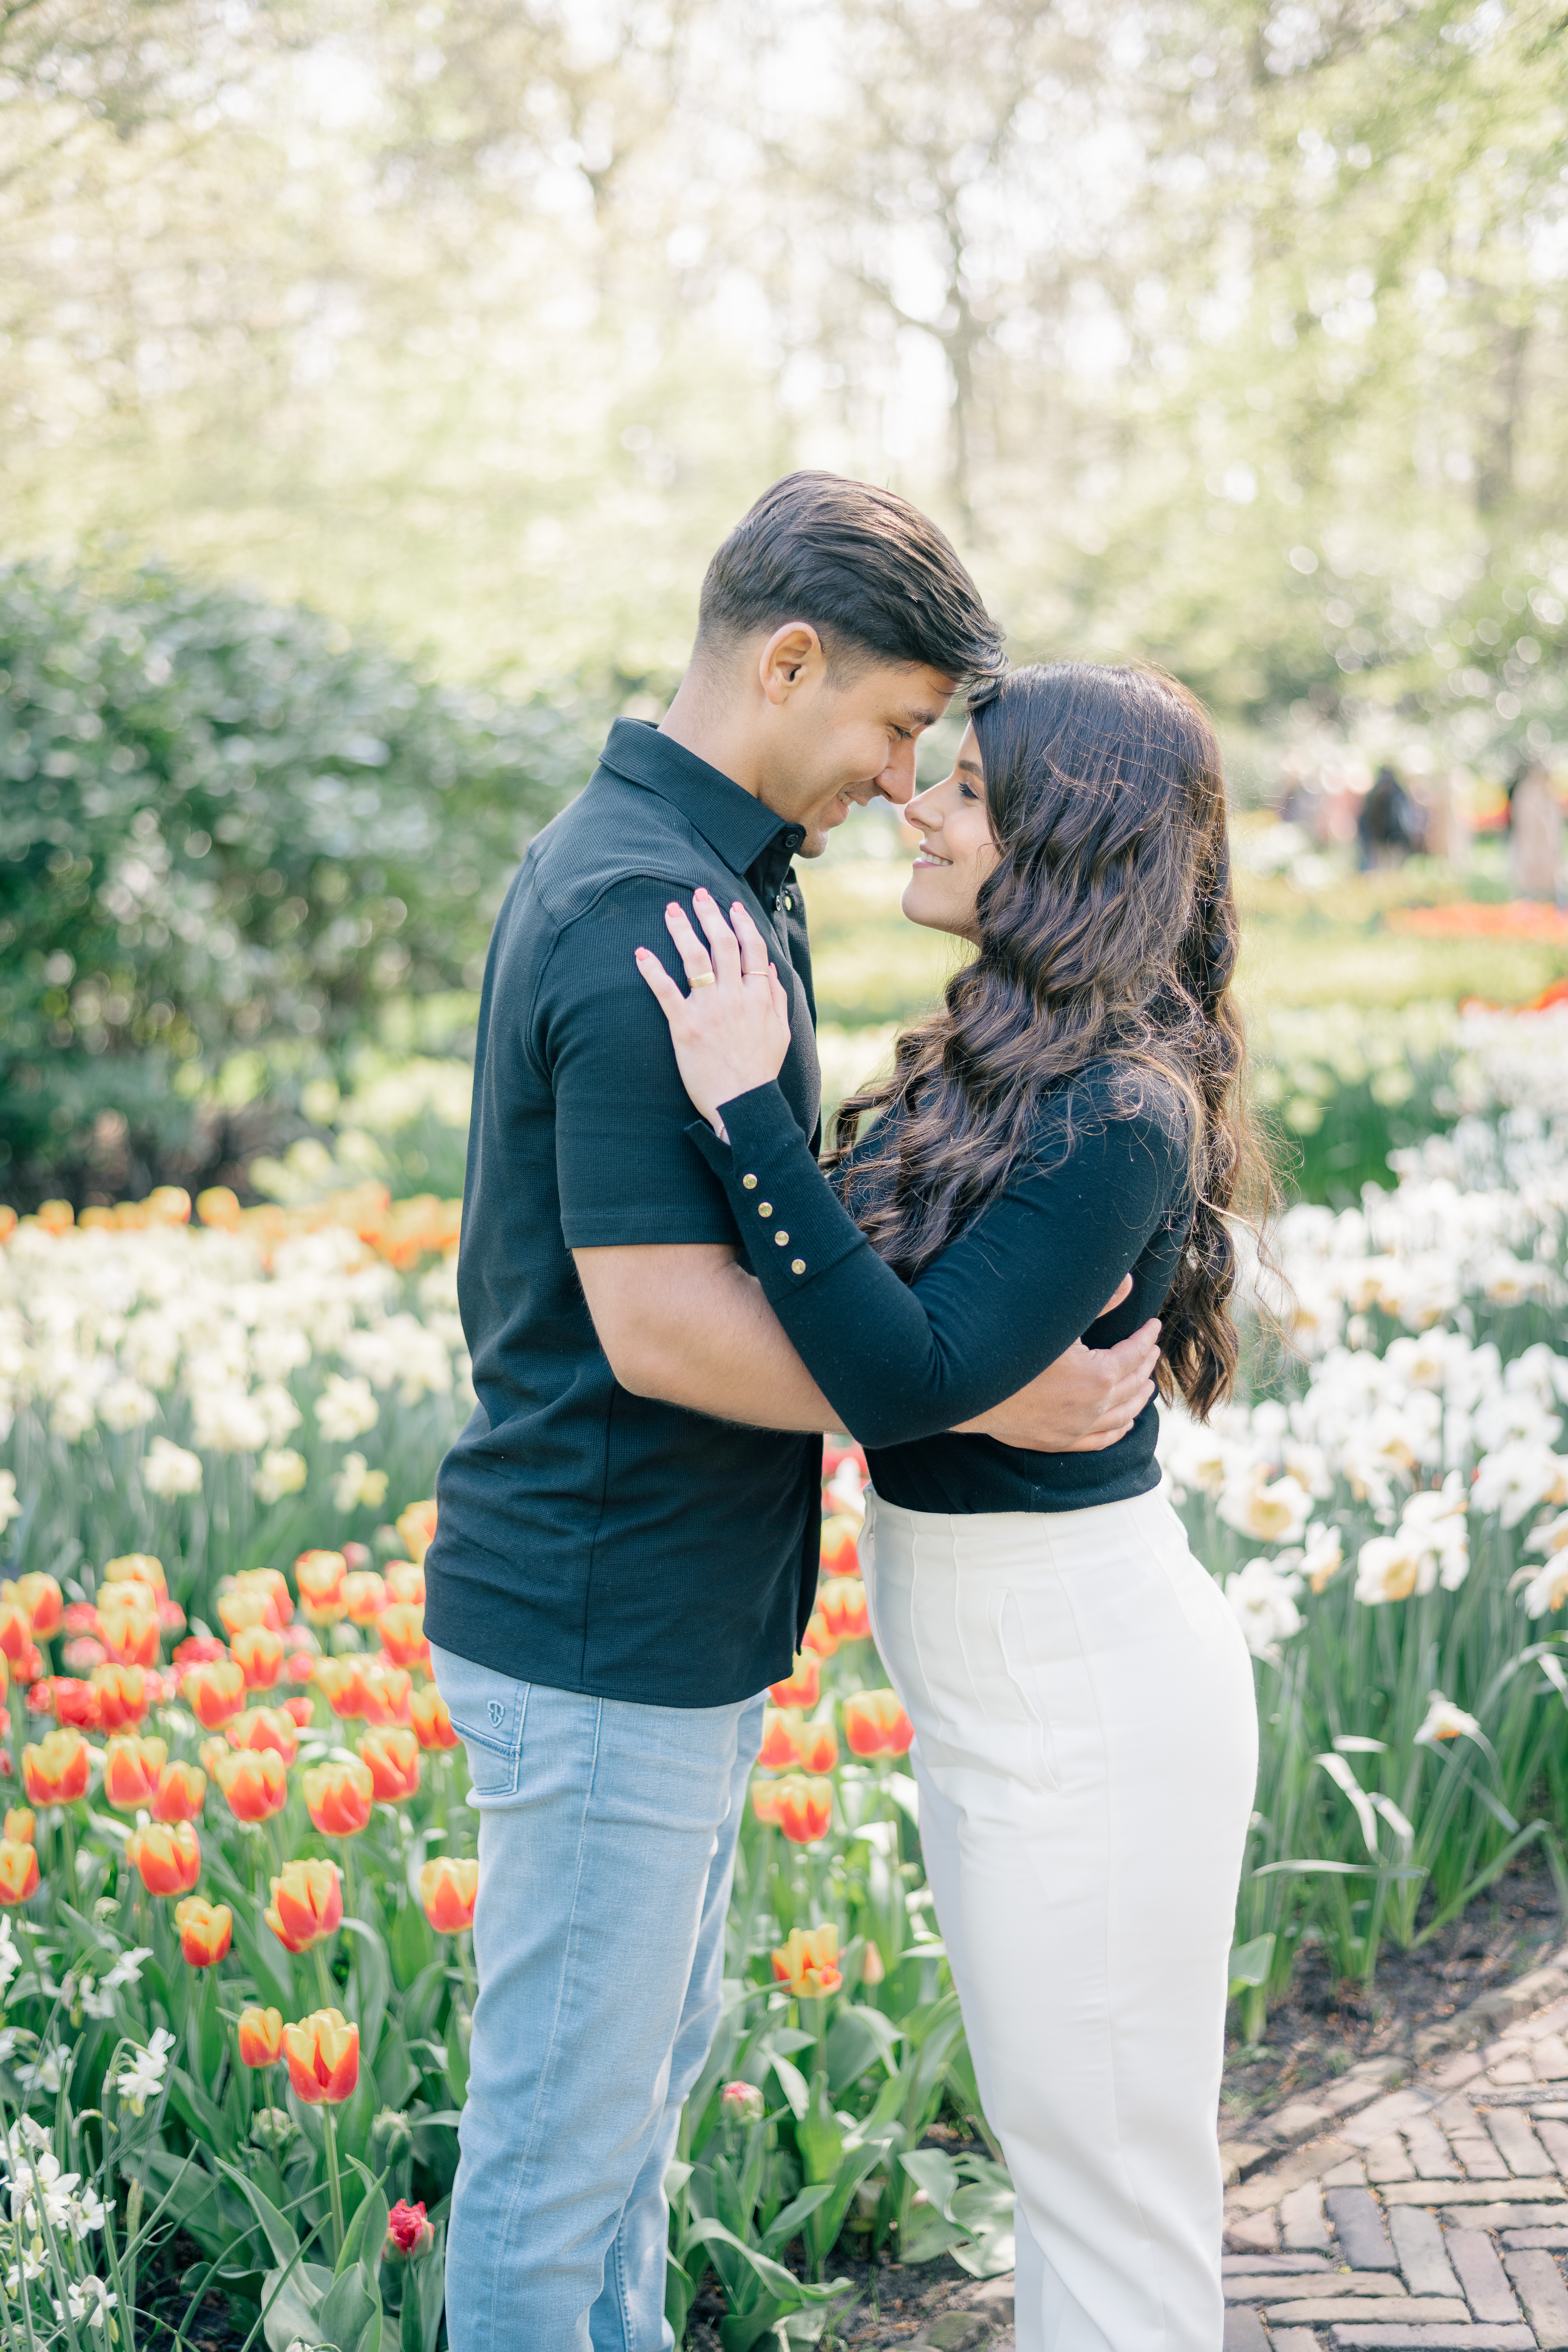 A woman and a man stand facing each other nose to nose in front of several flower beds in the Keukenhof garden